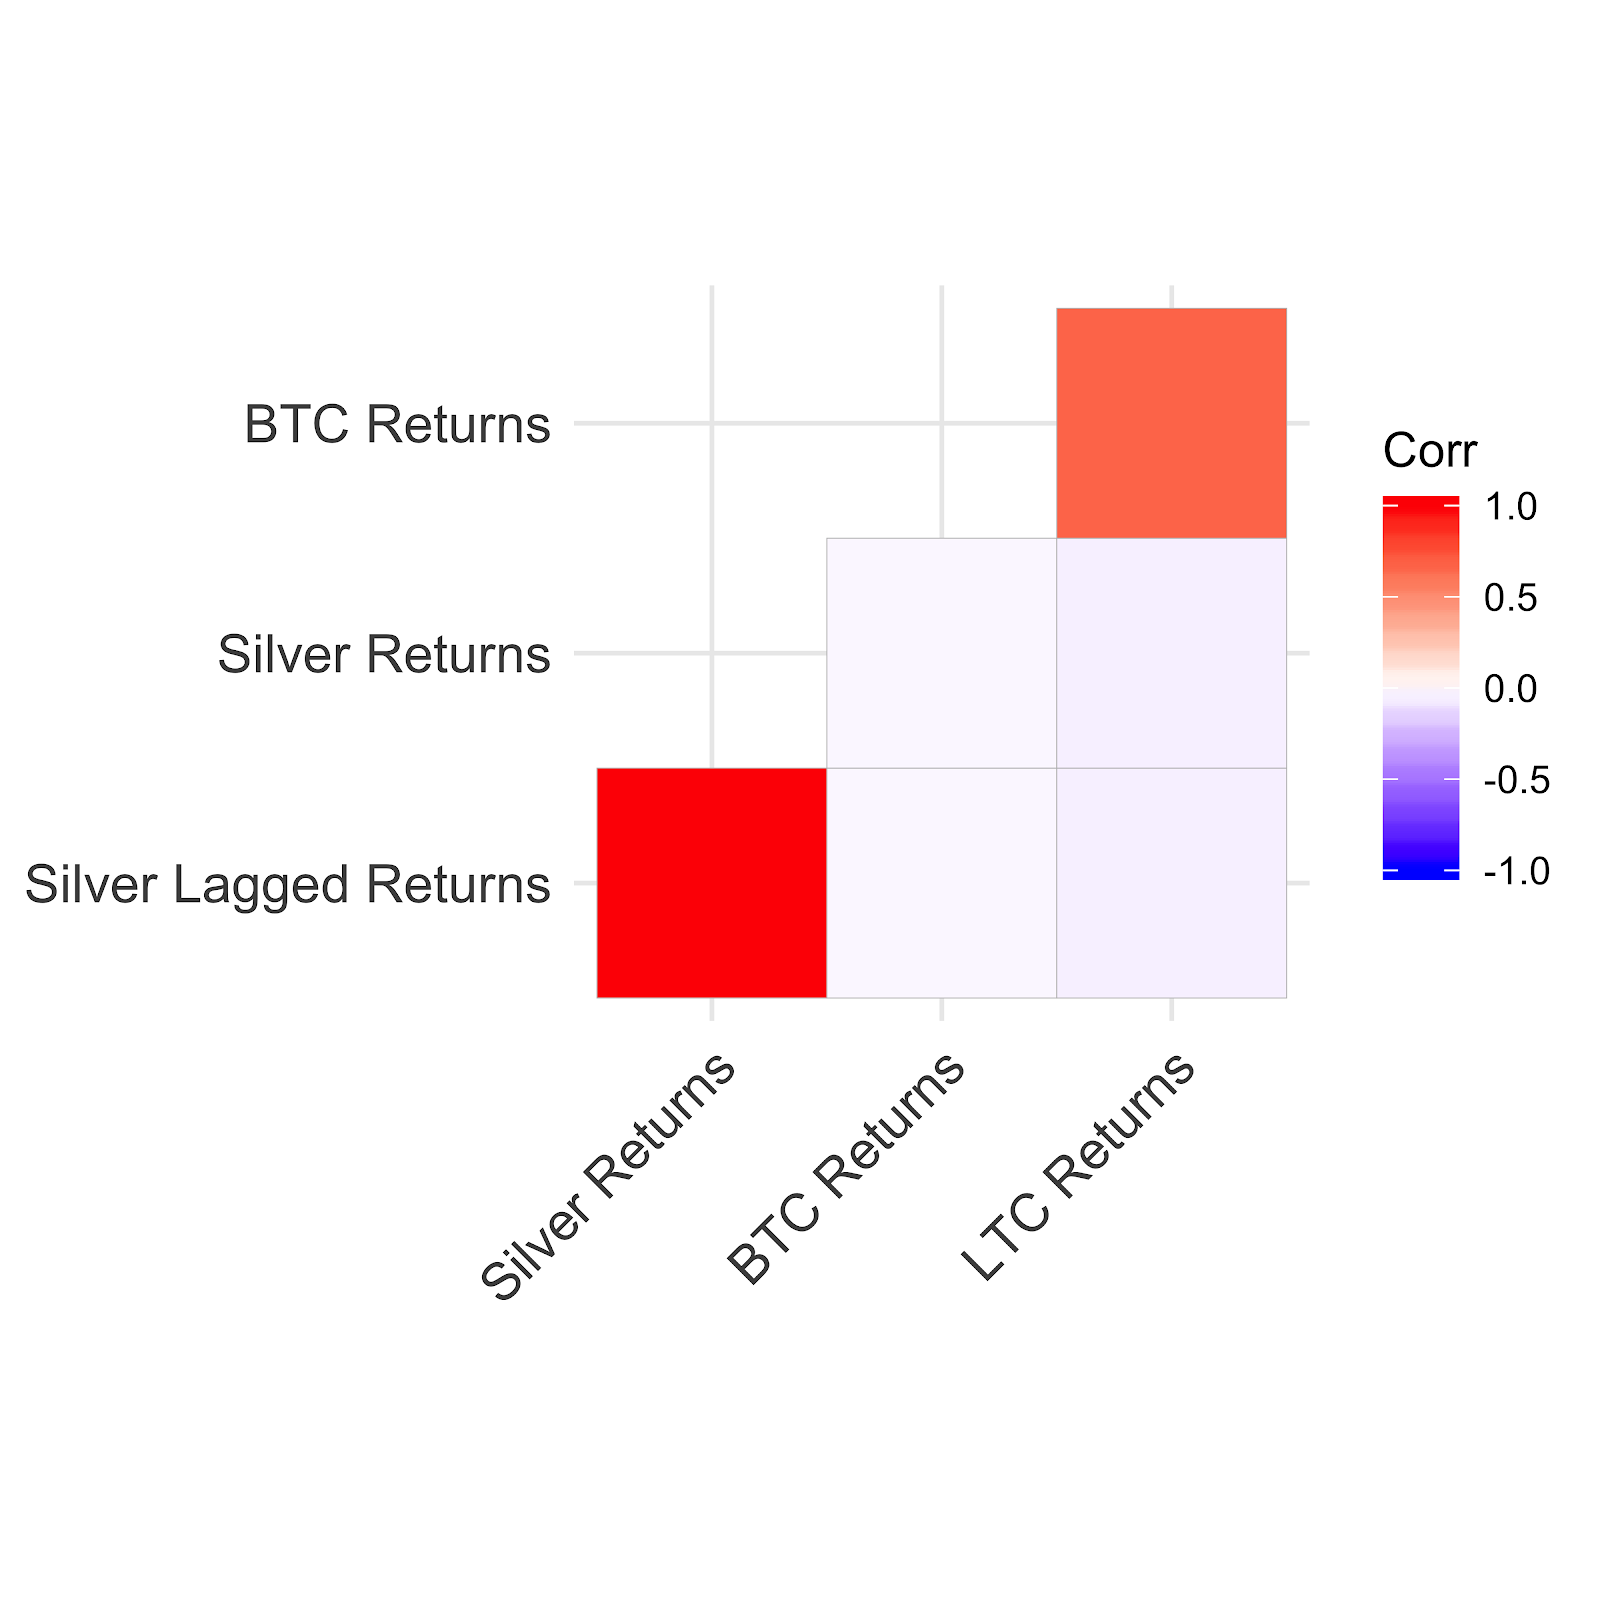 April 2013-December 2019 correlation between silver, Bitcoin and Litecoin returns and silver’s lagged returns